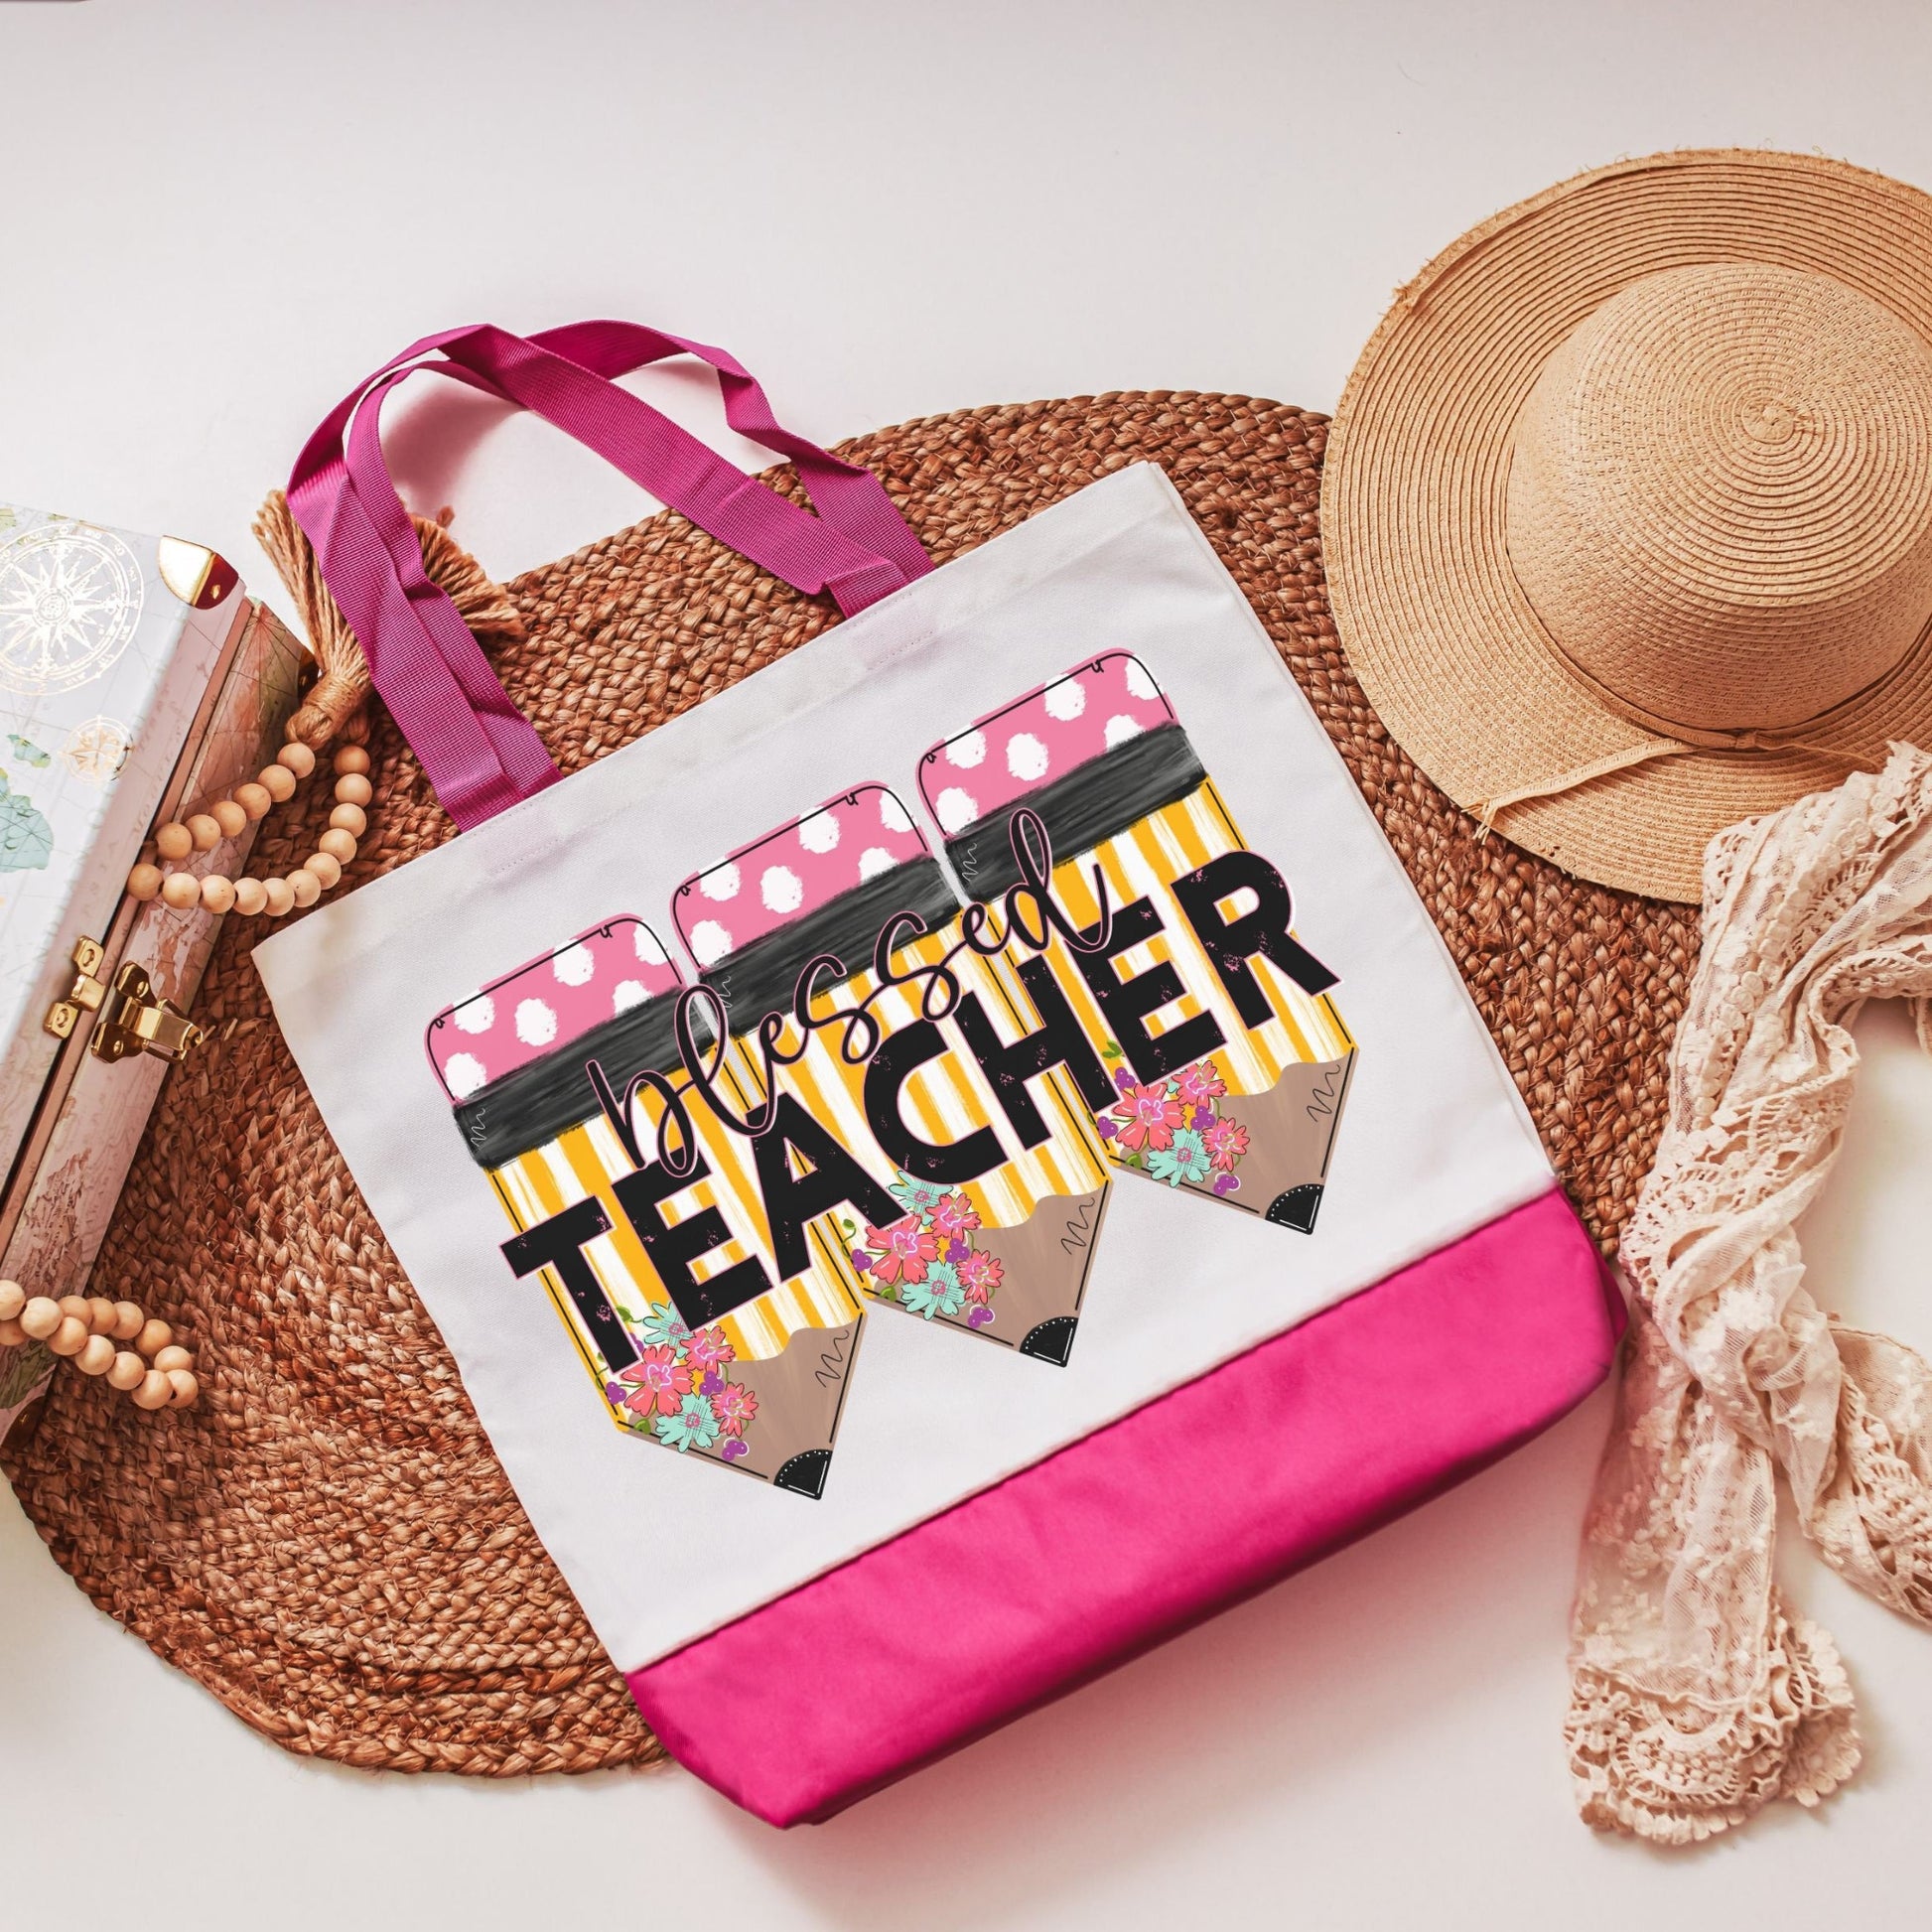 Blessed teacher tote bag - Pink